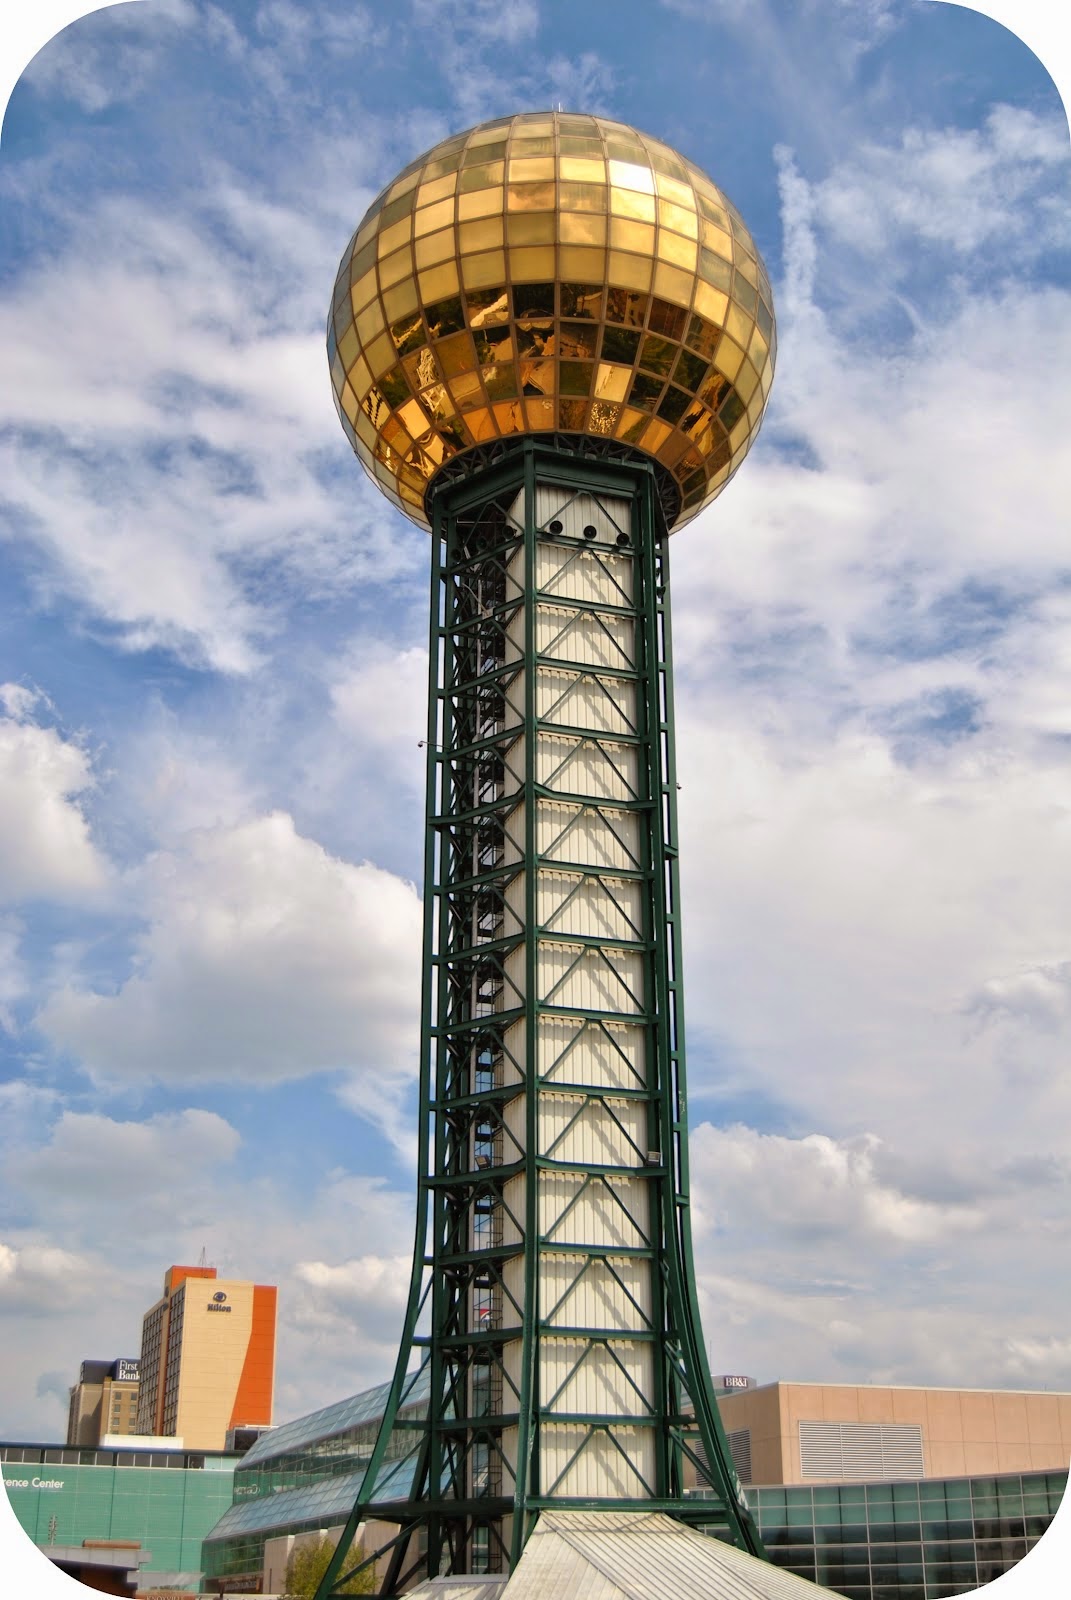 Knoxville TN sunsphere World's Fair architectural tower